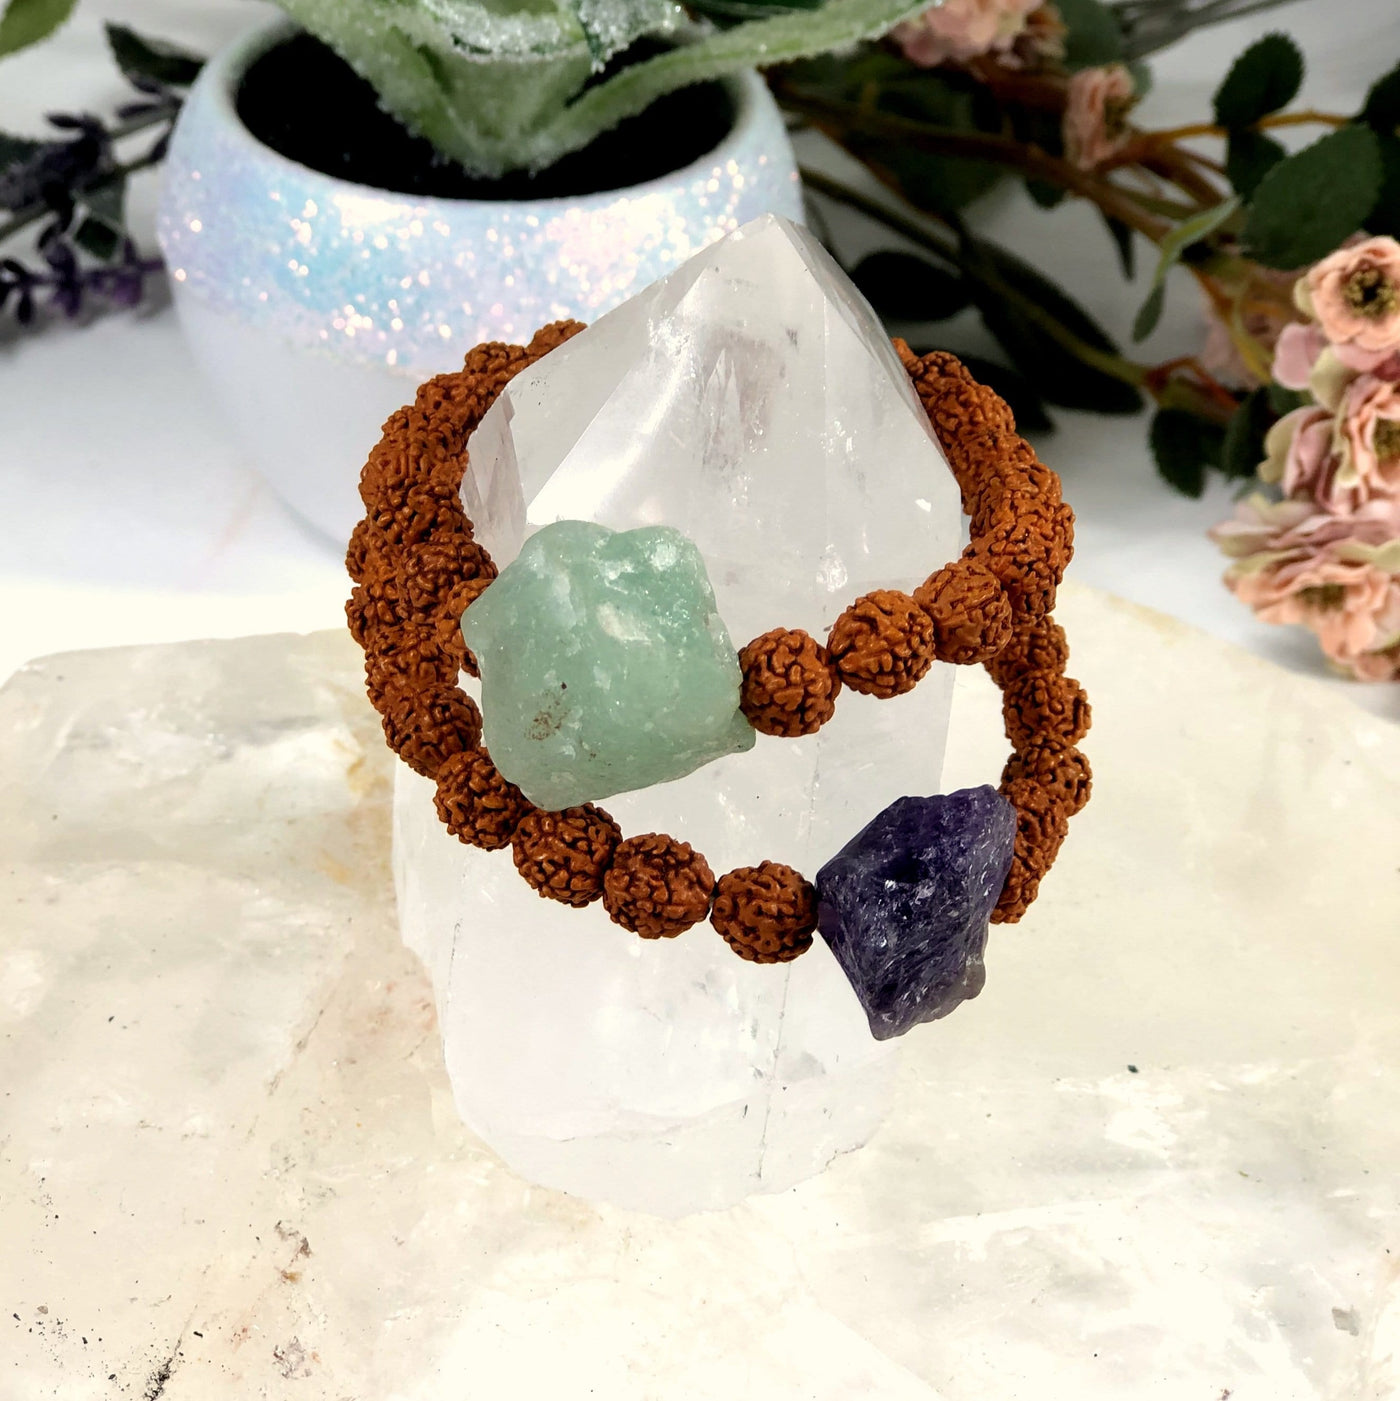 Diffuser Bracelet Radruska with Amethyst or Aventurine in Crystal Point on White Background.